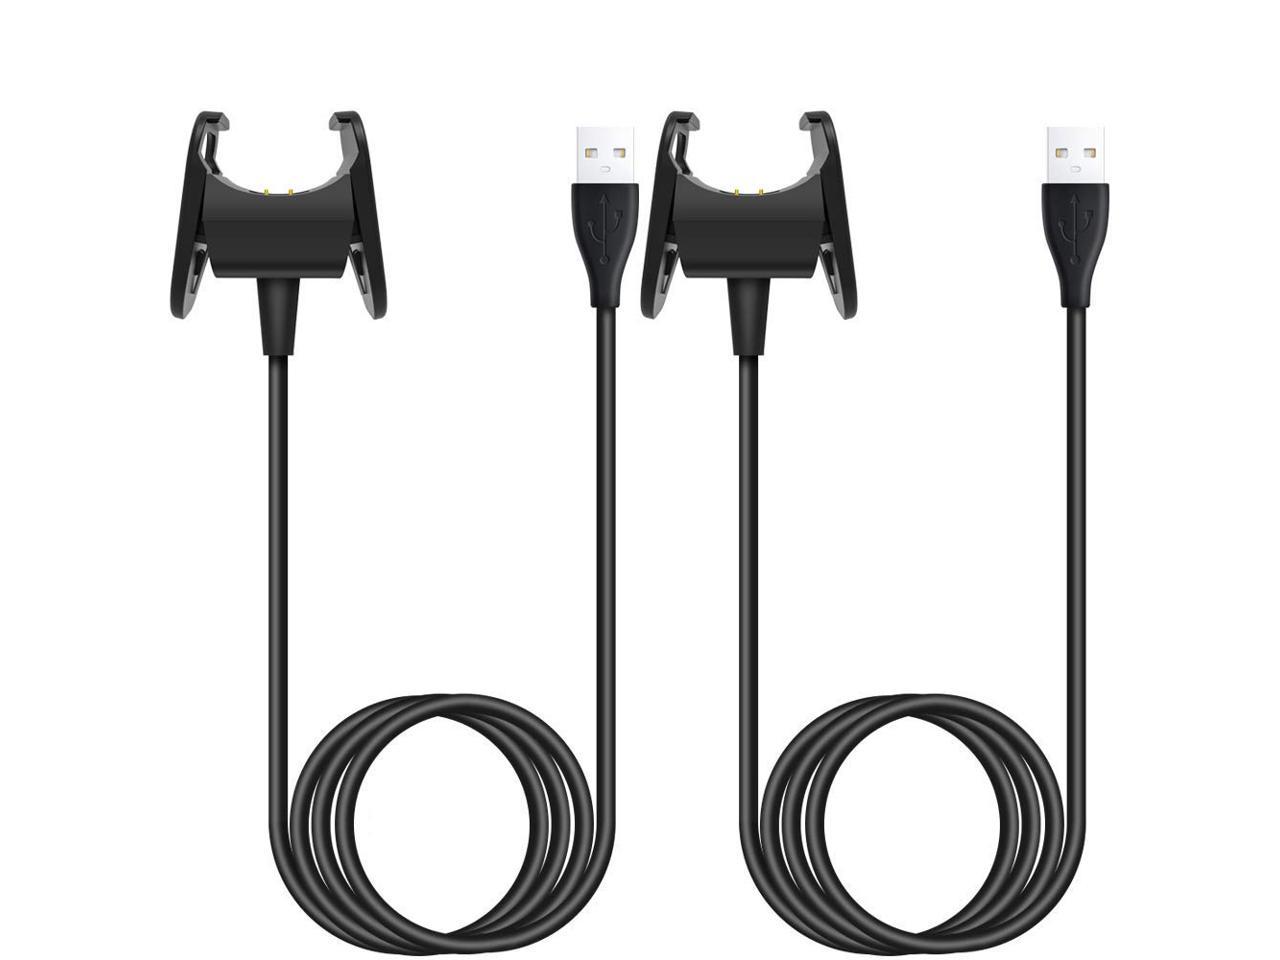 WITHit USB Charging Cable for use with FitBit Charge HR 3 foot Black 